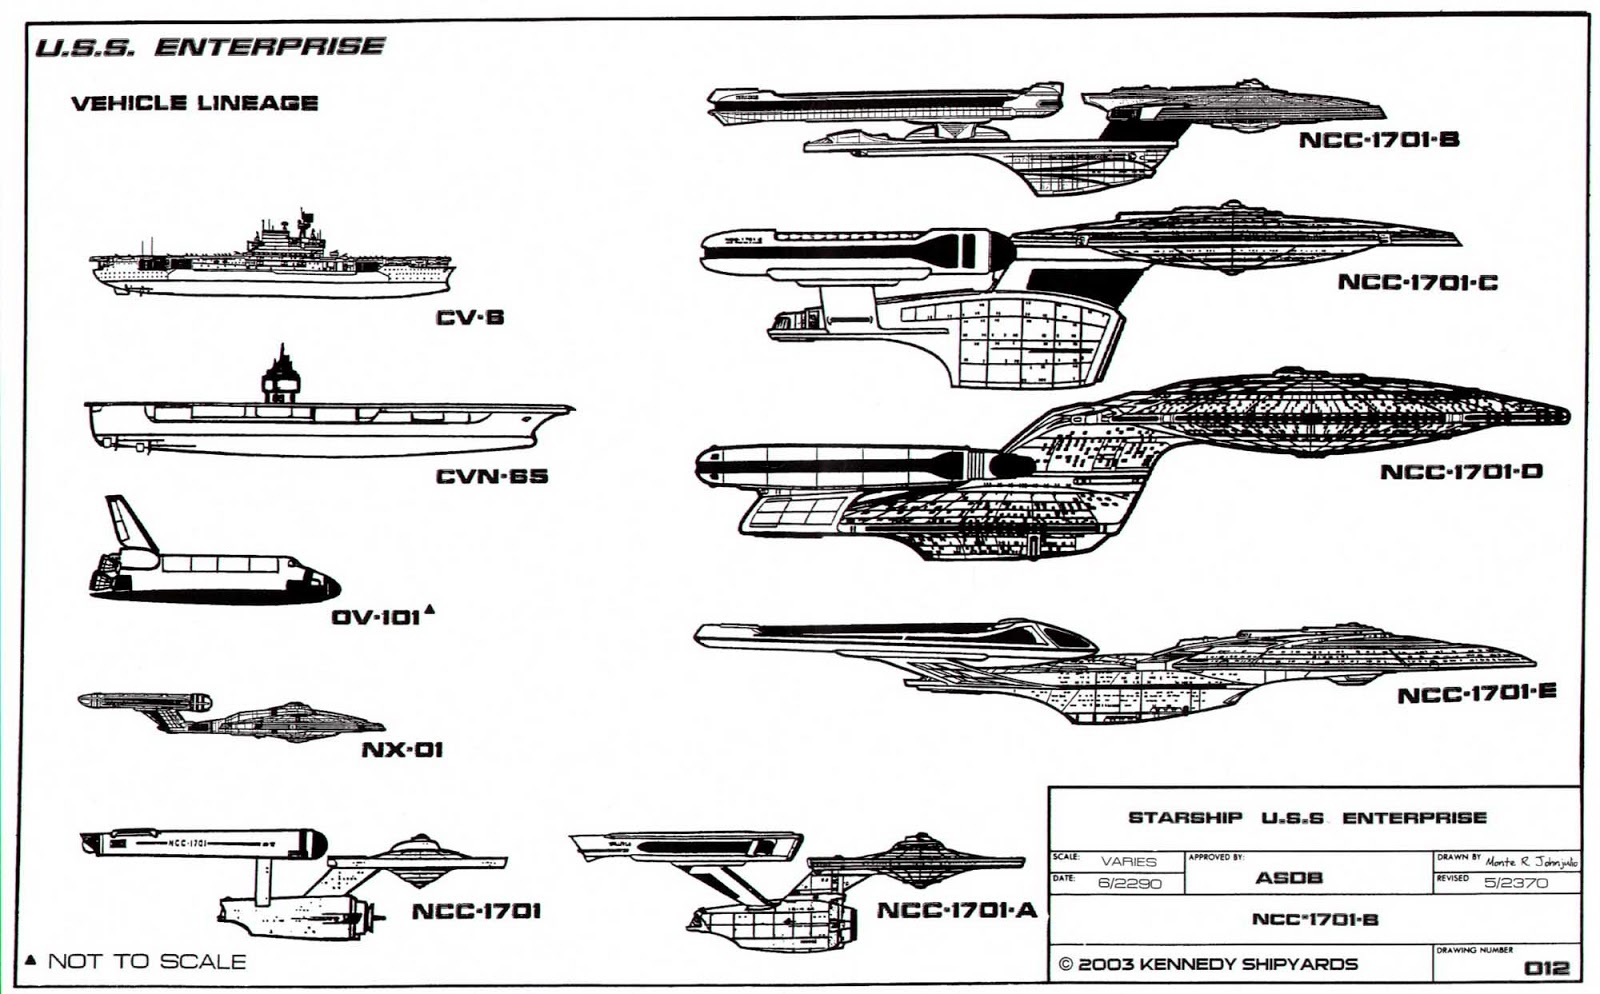 The Dork Review: Rob's Room: Enterprise NCC-1701 Cross Sections